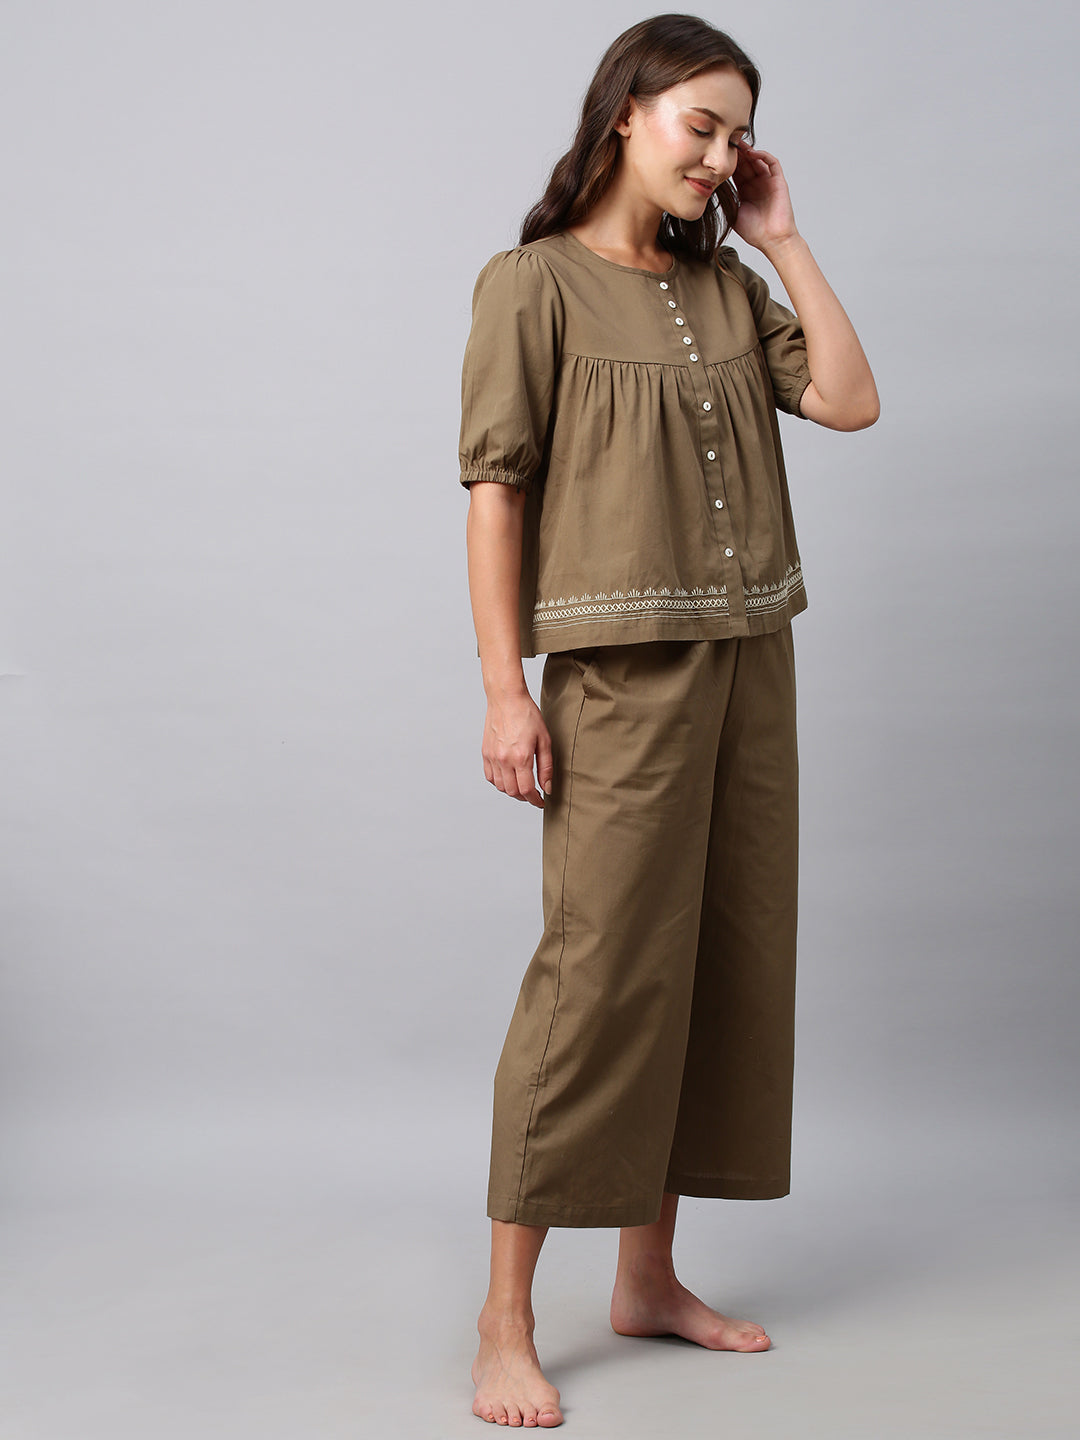 Crisp Poplin Co-Ord Set  With An Embroidered Swing Basque Top And Cropped Pj's